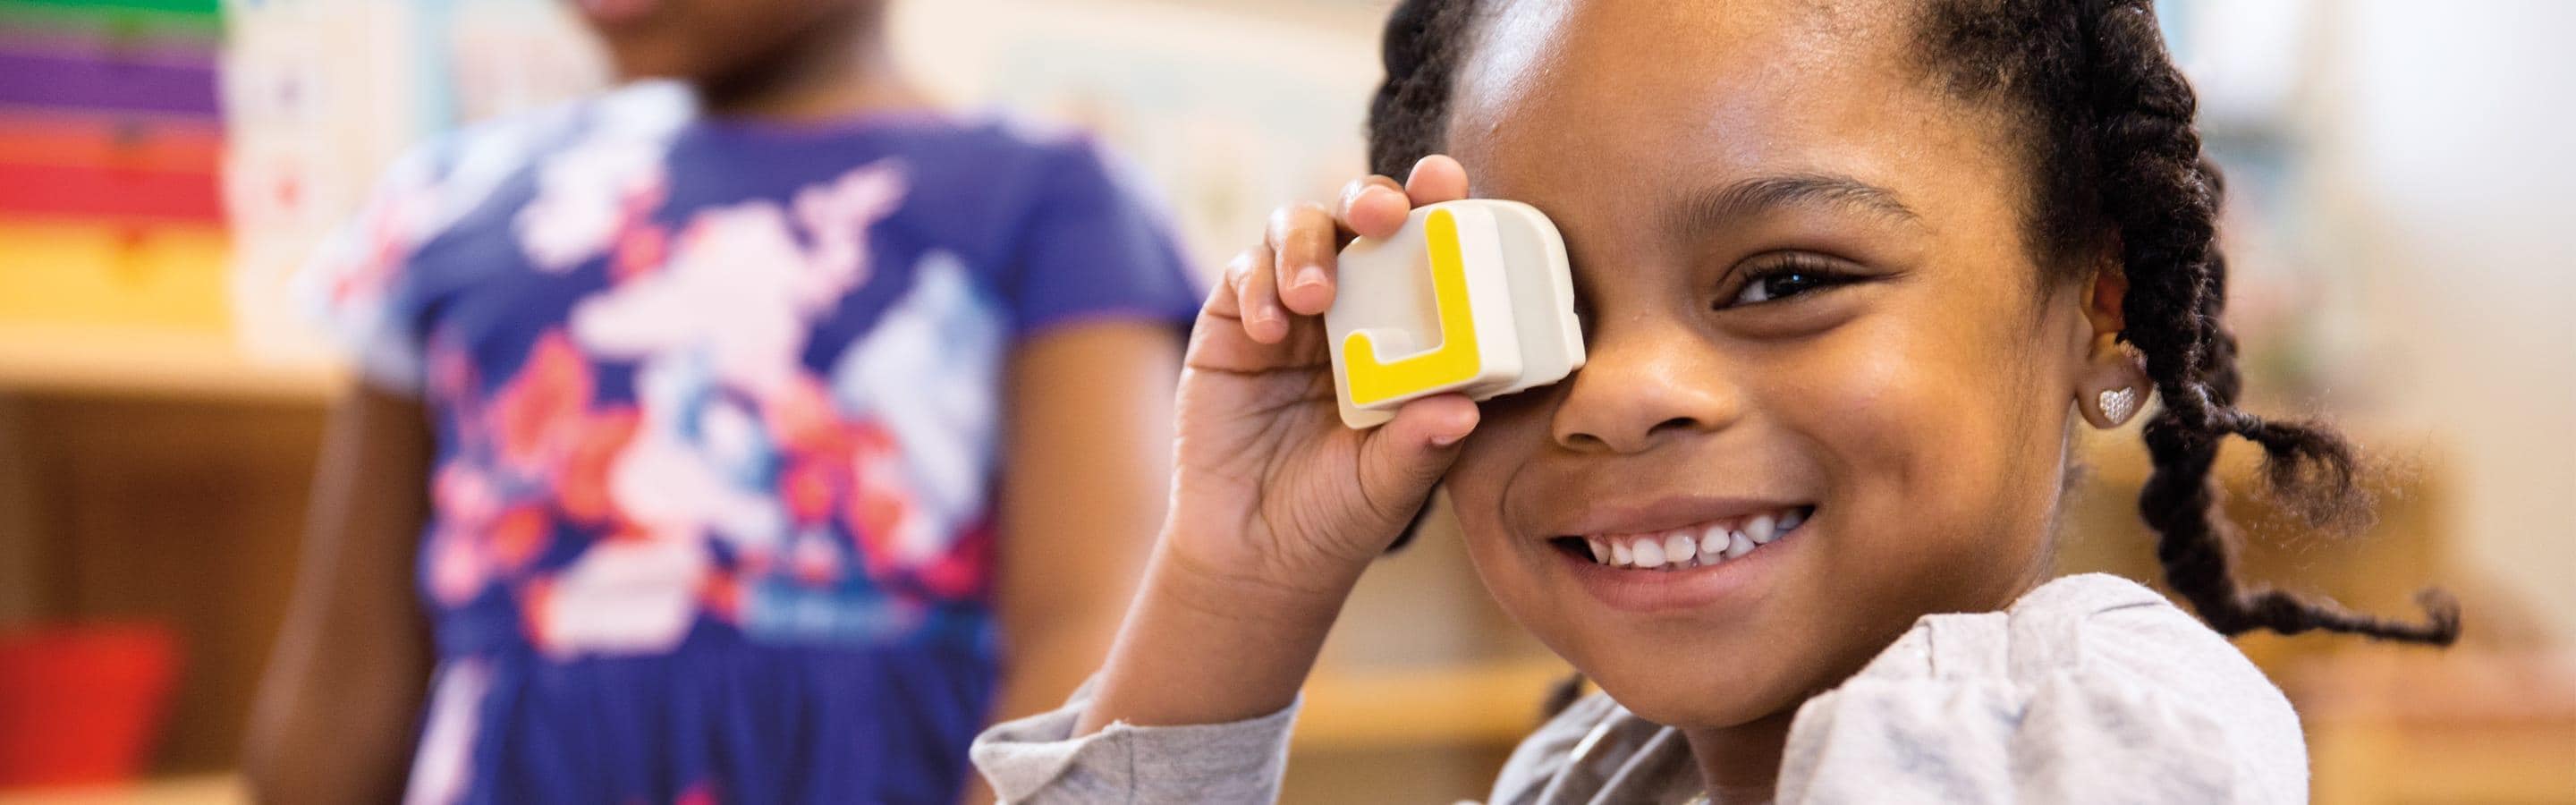 Young girl smiling holding a block up to her eye